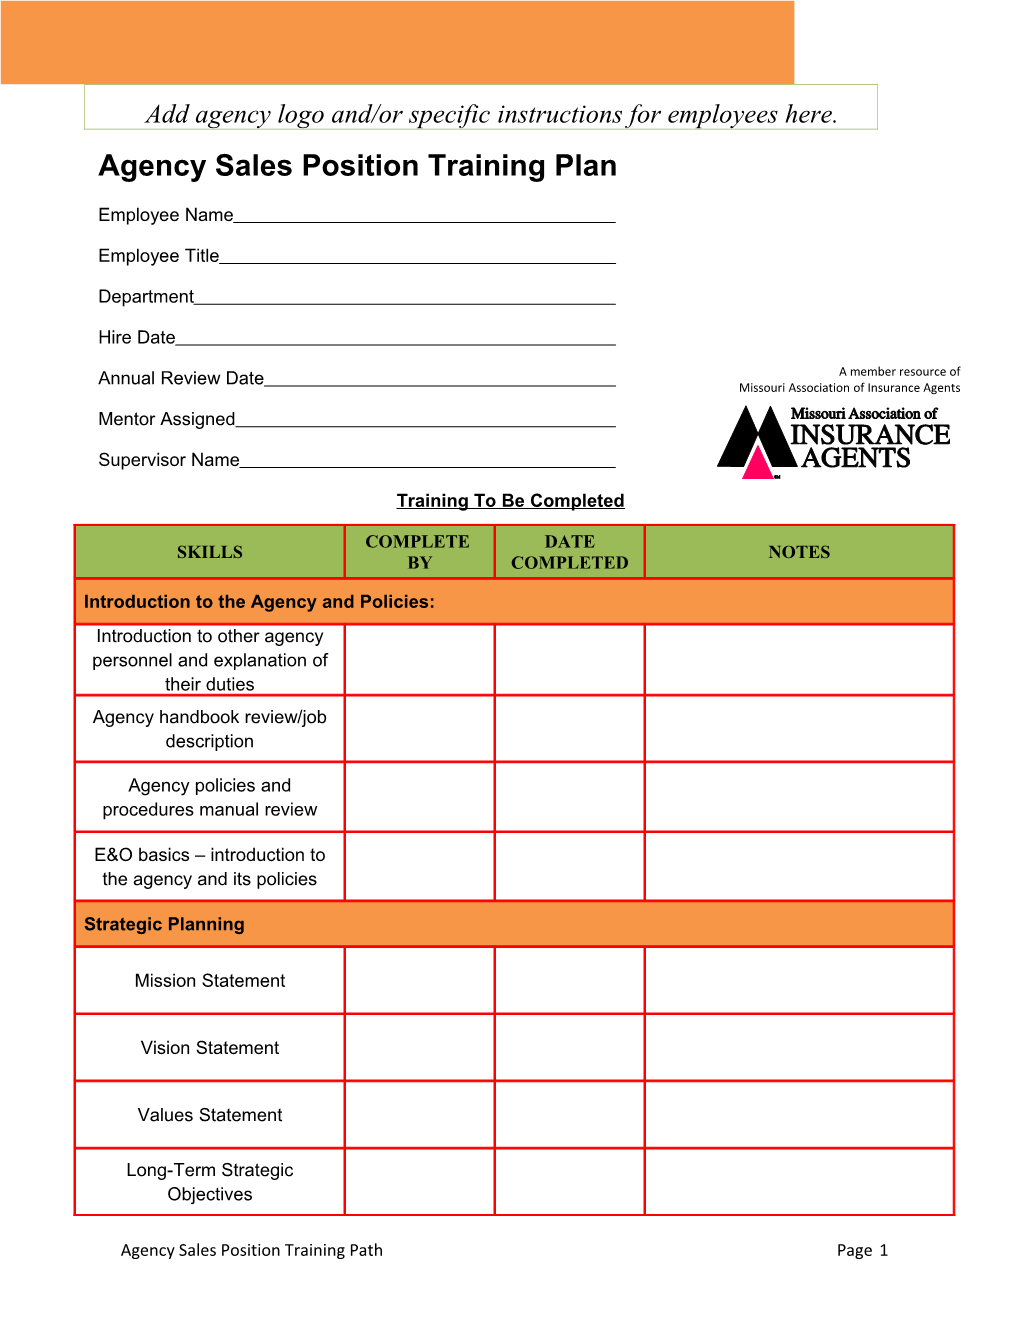 Agency Sales Positiontraining Plan